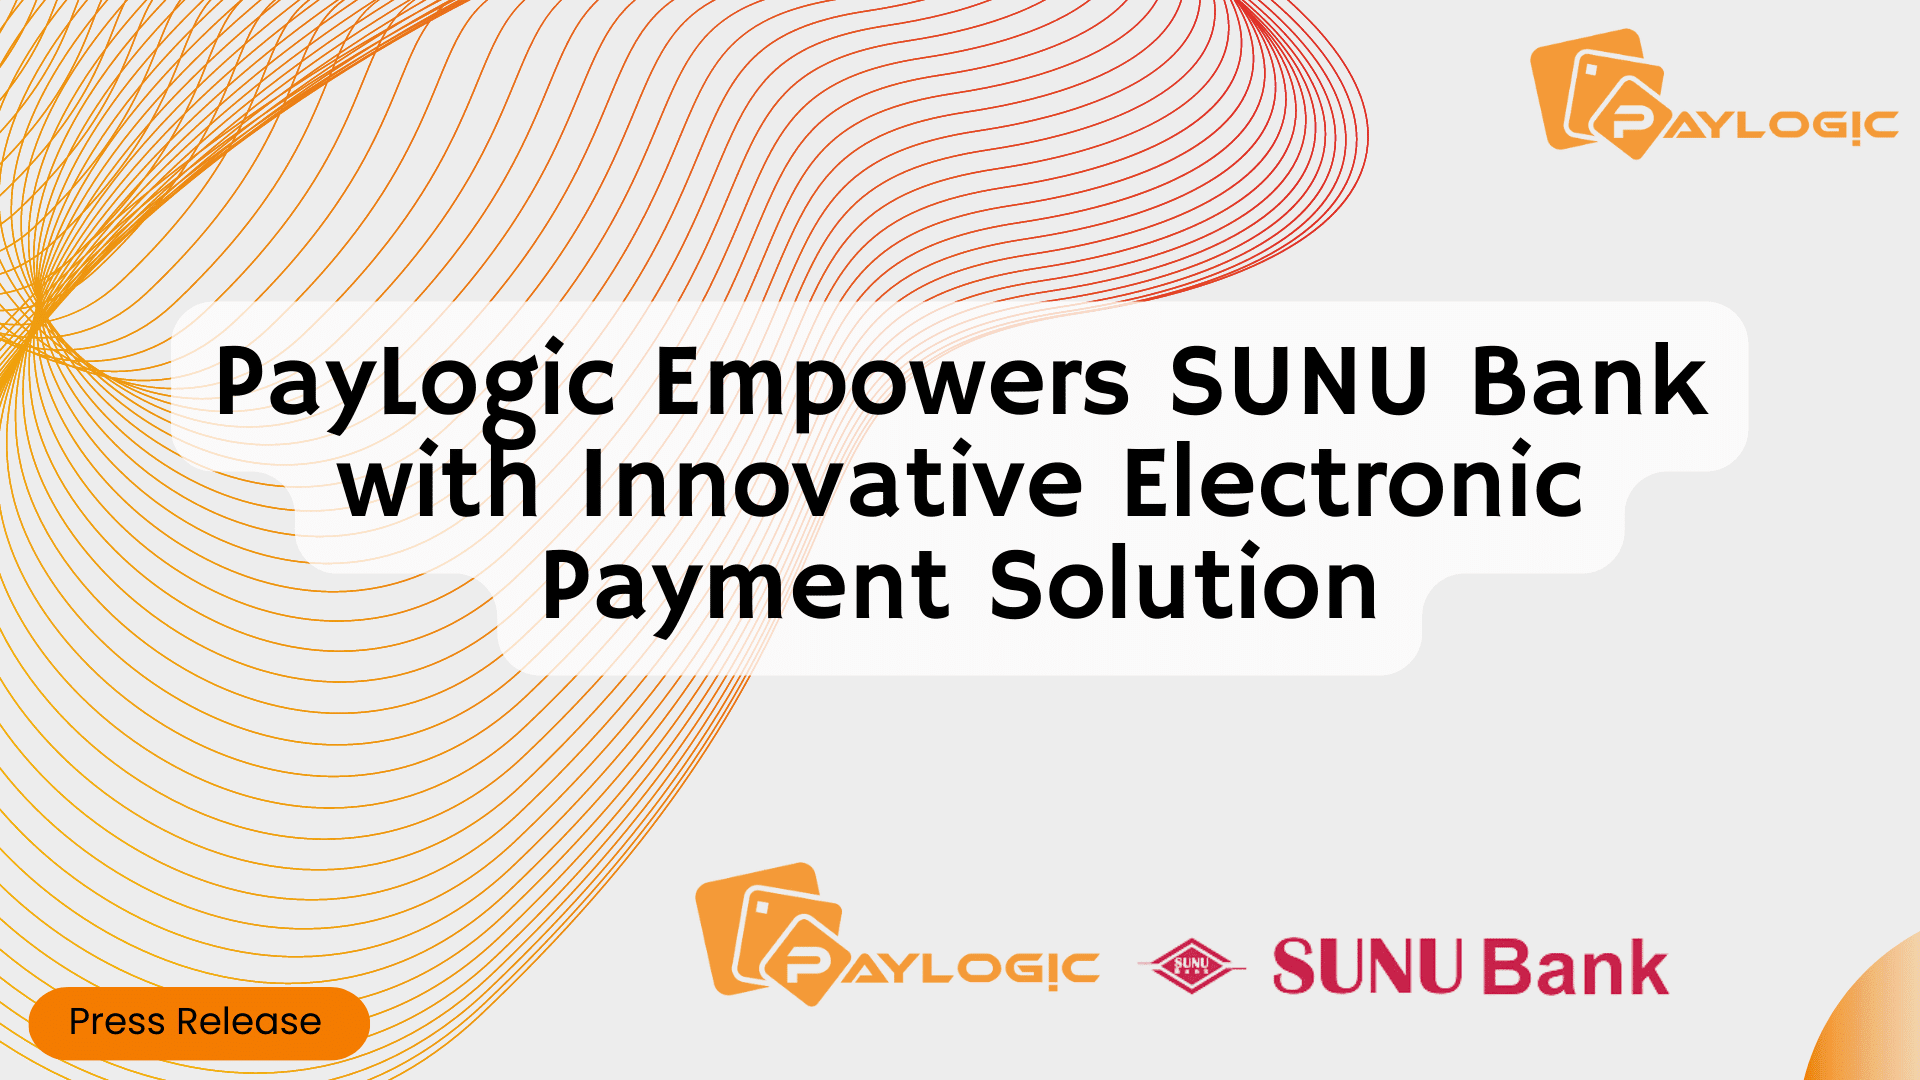 PayLogic Empowers SUNU Bank with Innovative Electronic Payment Solution